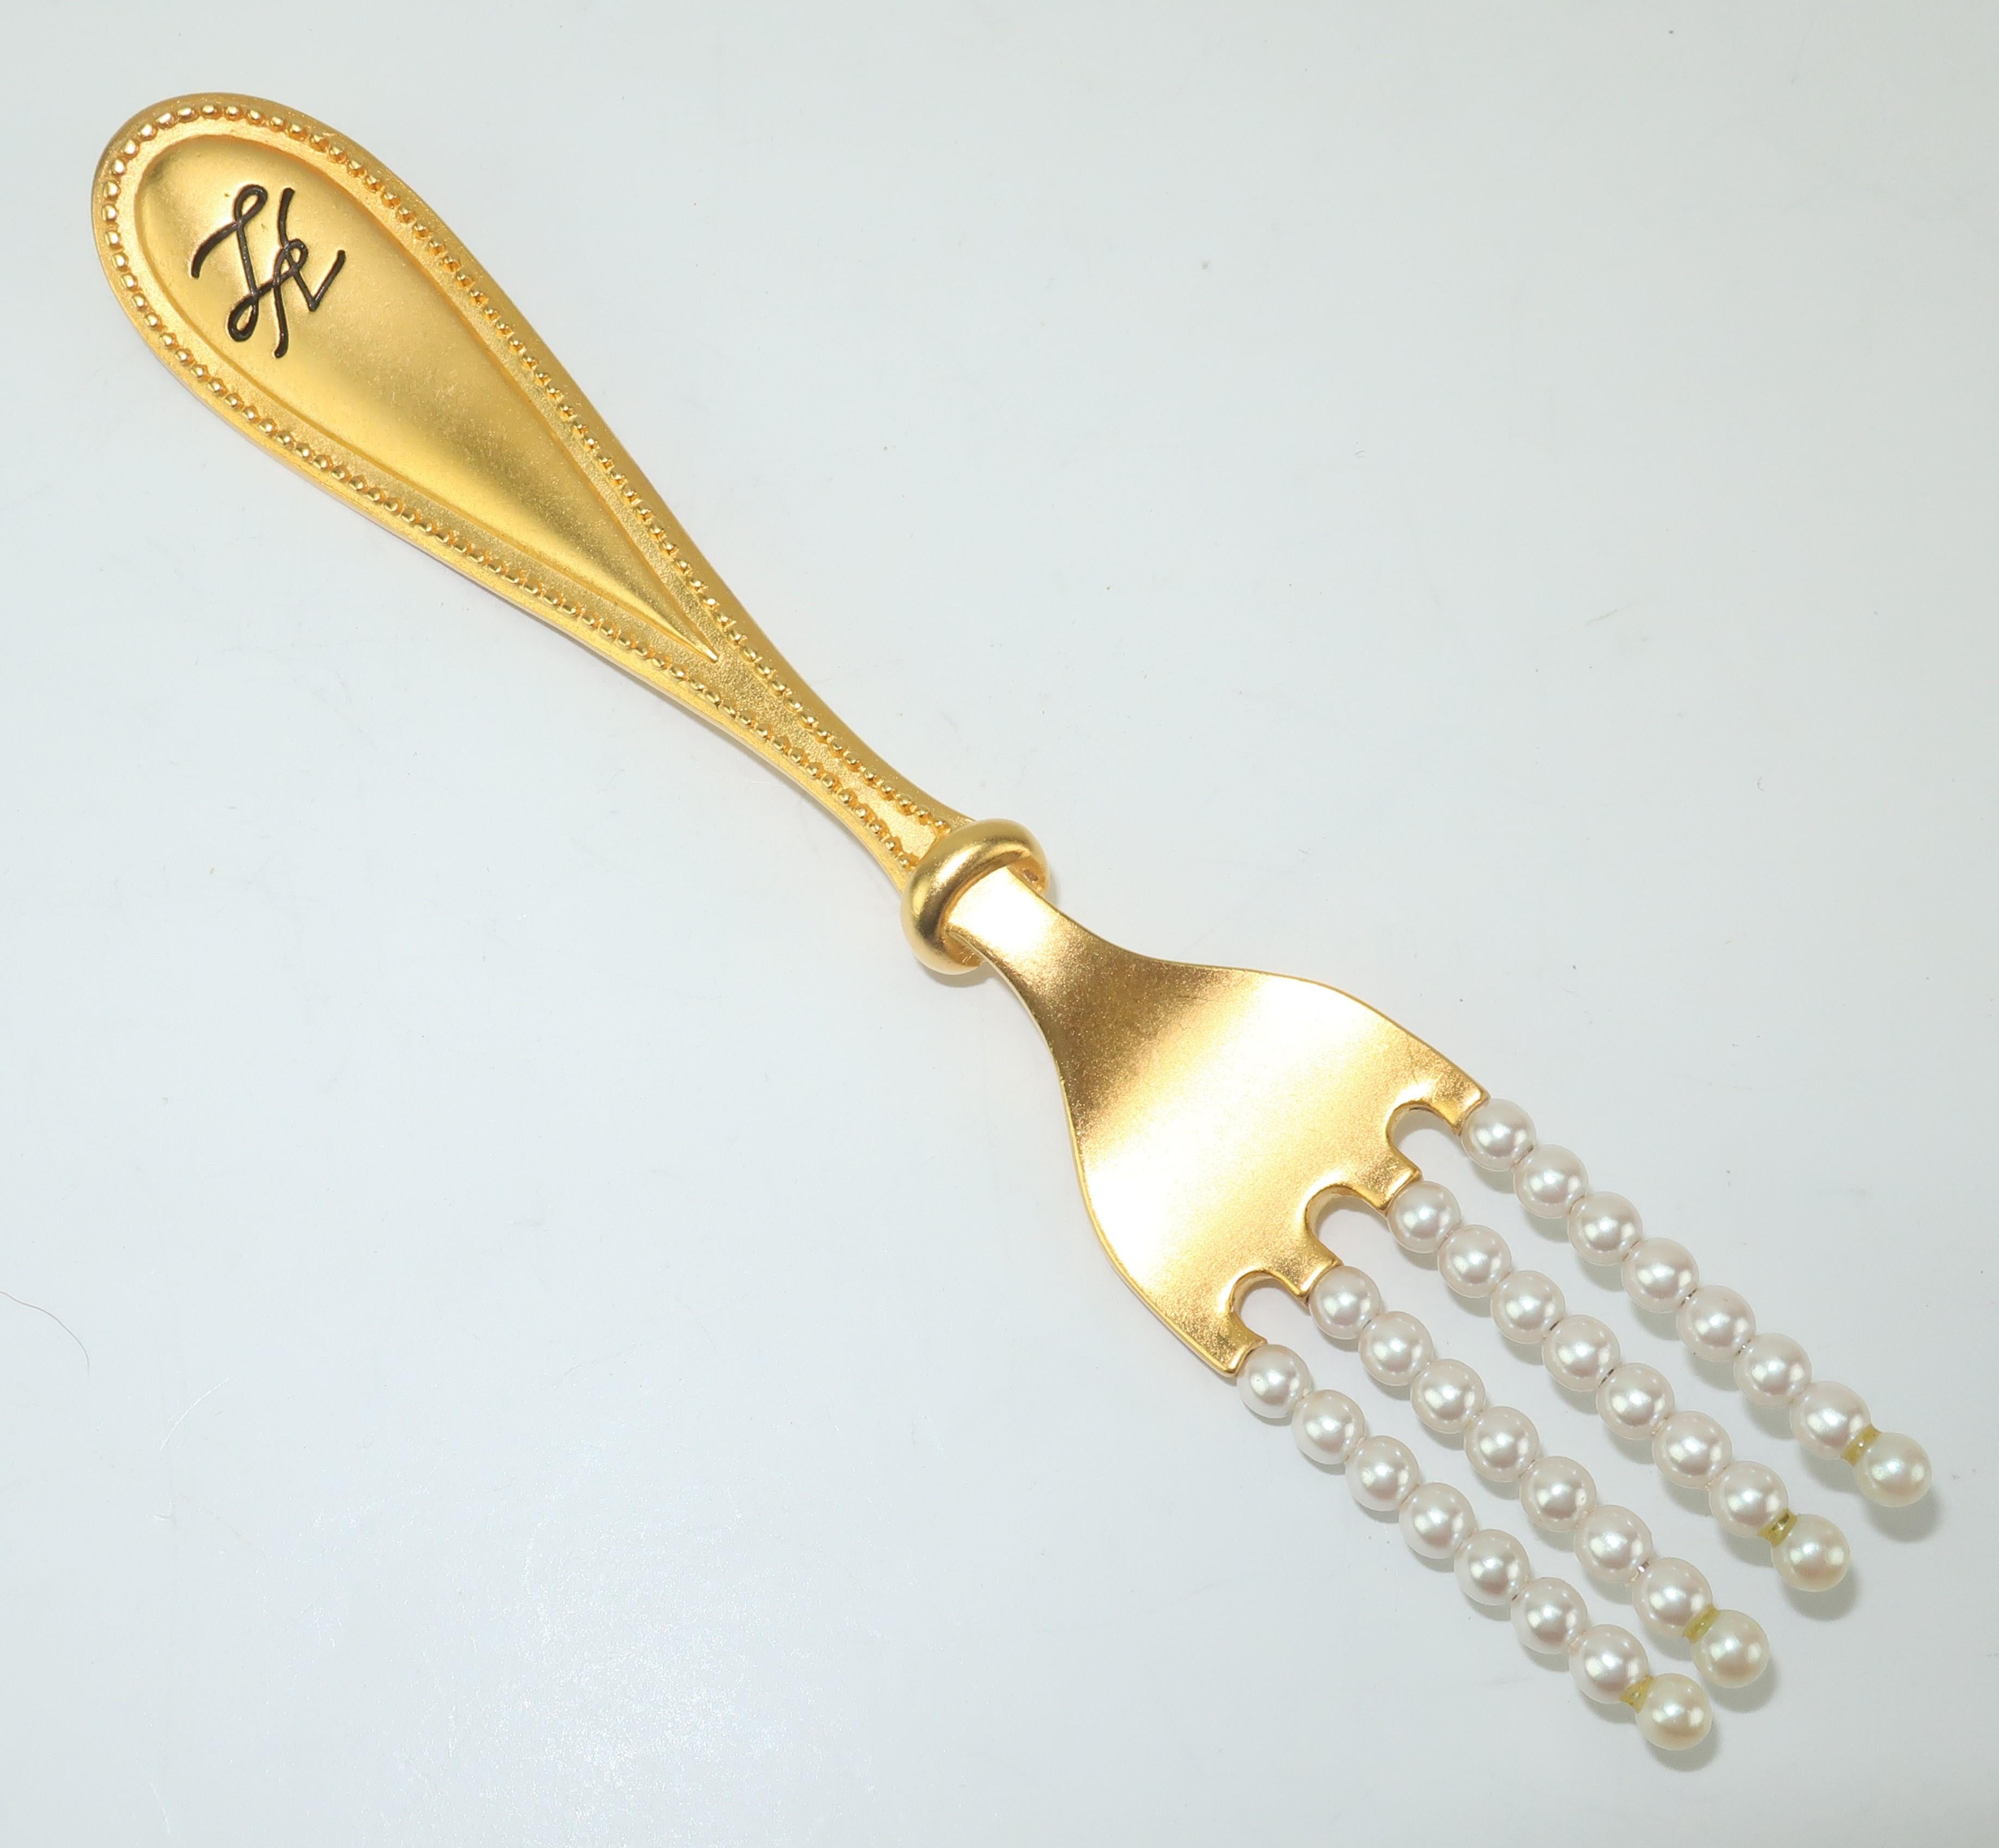 Baroque Revival Large Karl Lagerfeld Gilt Gold Fork & Spoon Brooch With Pearls